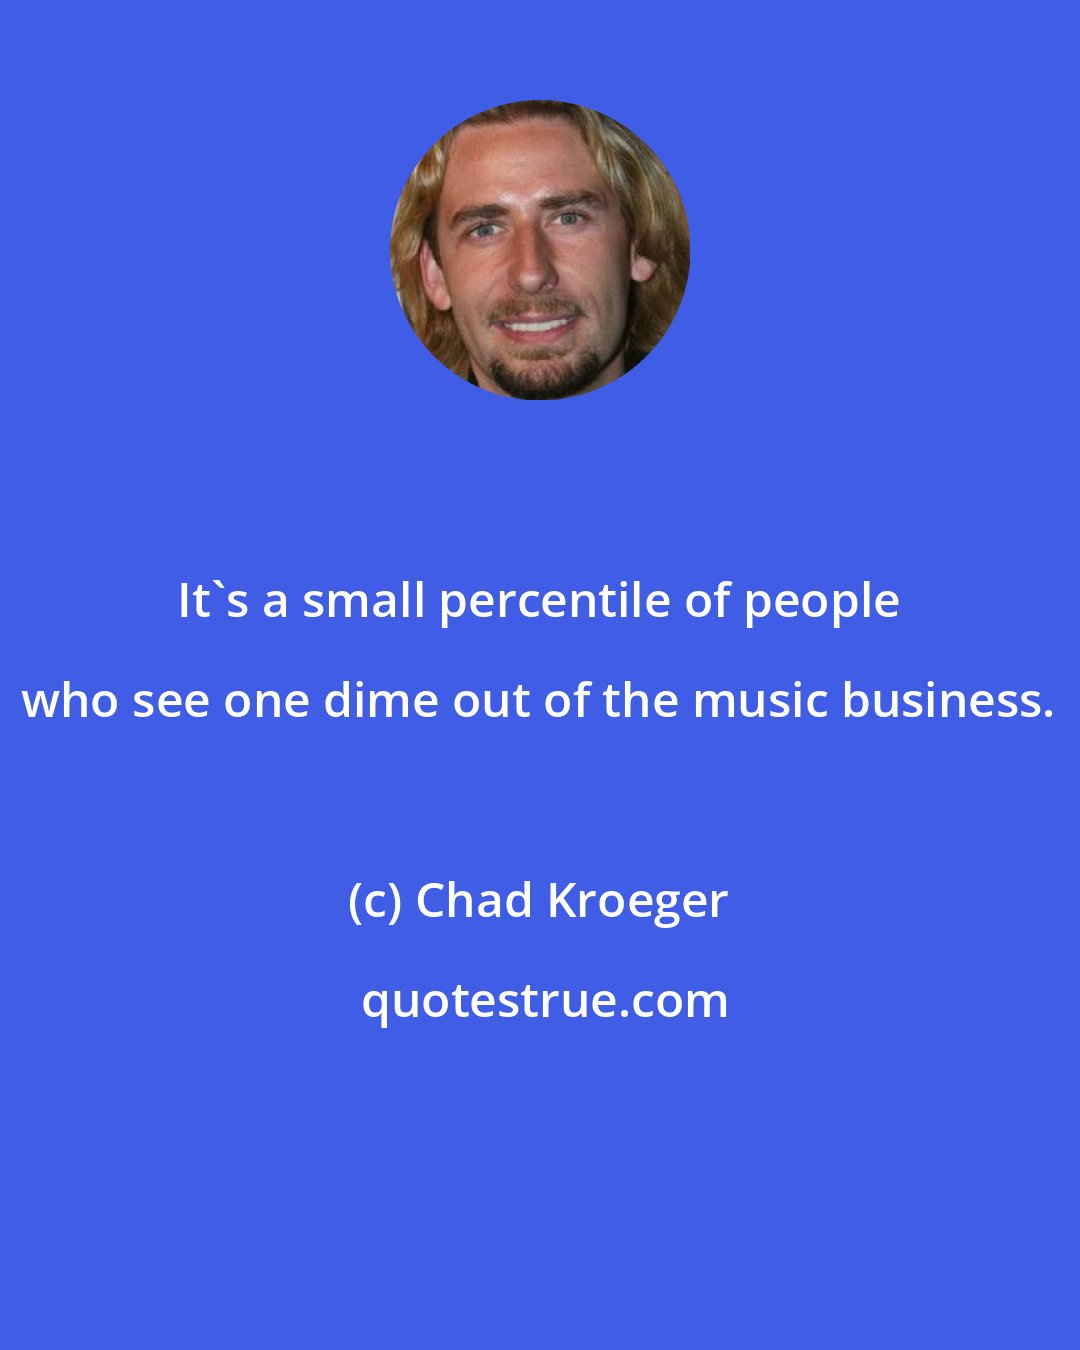 Chad Kroeger: It's a small percentile of people who see one dime out of the music business.